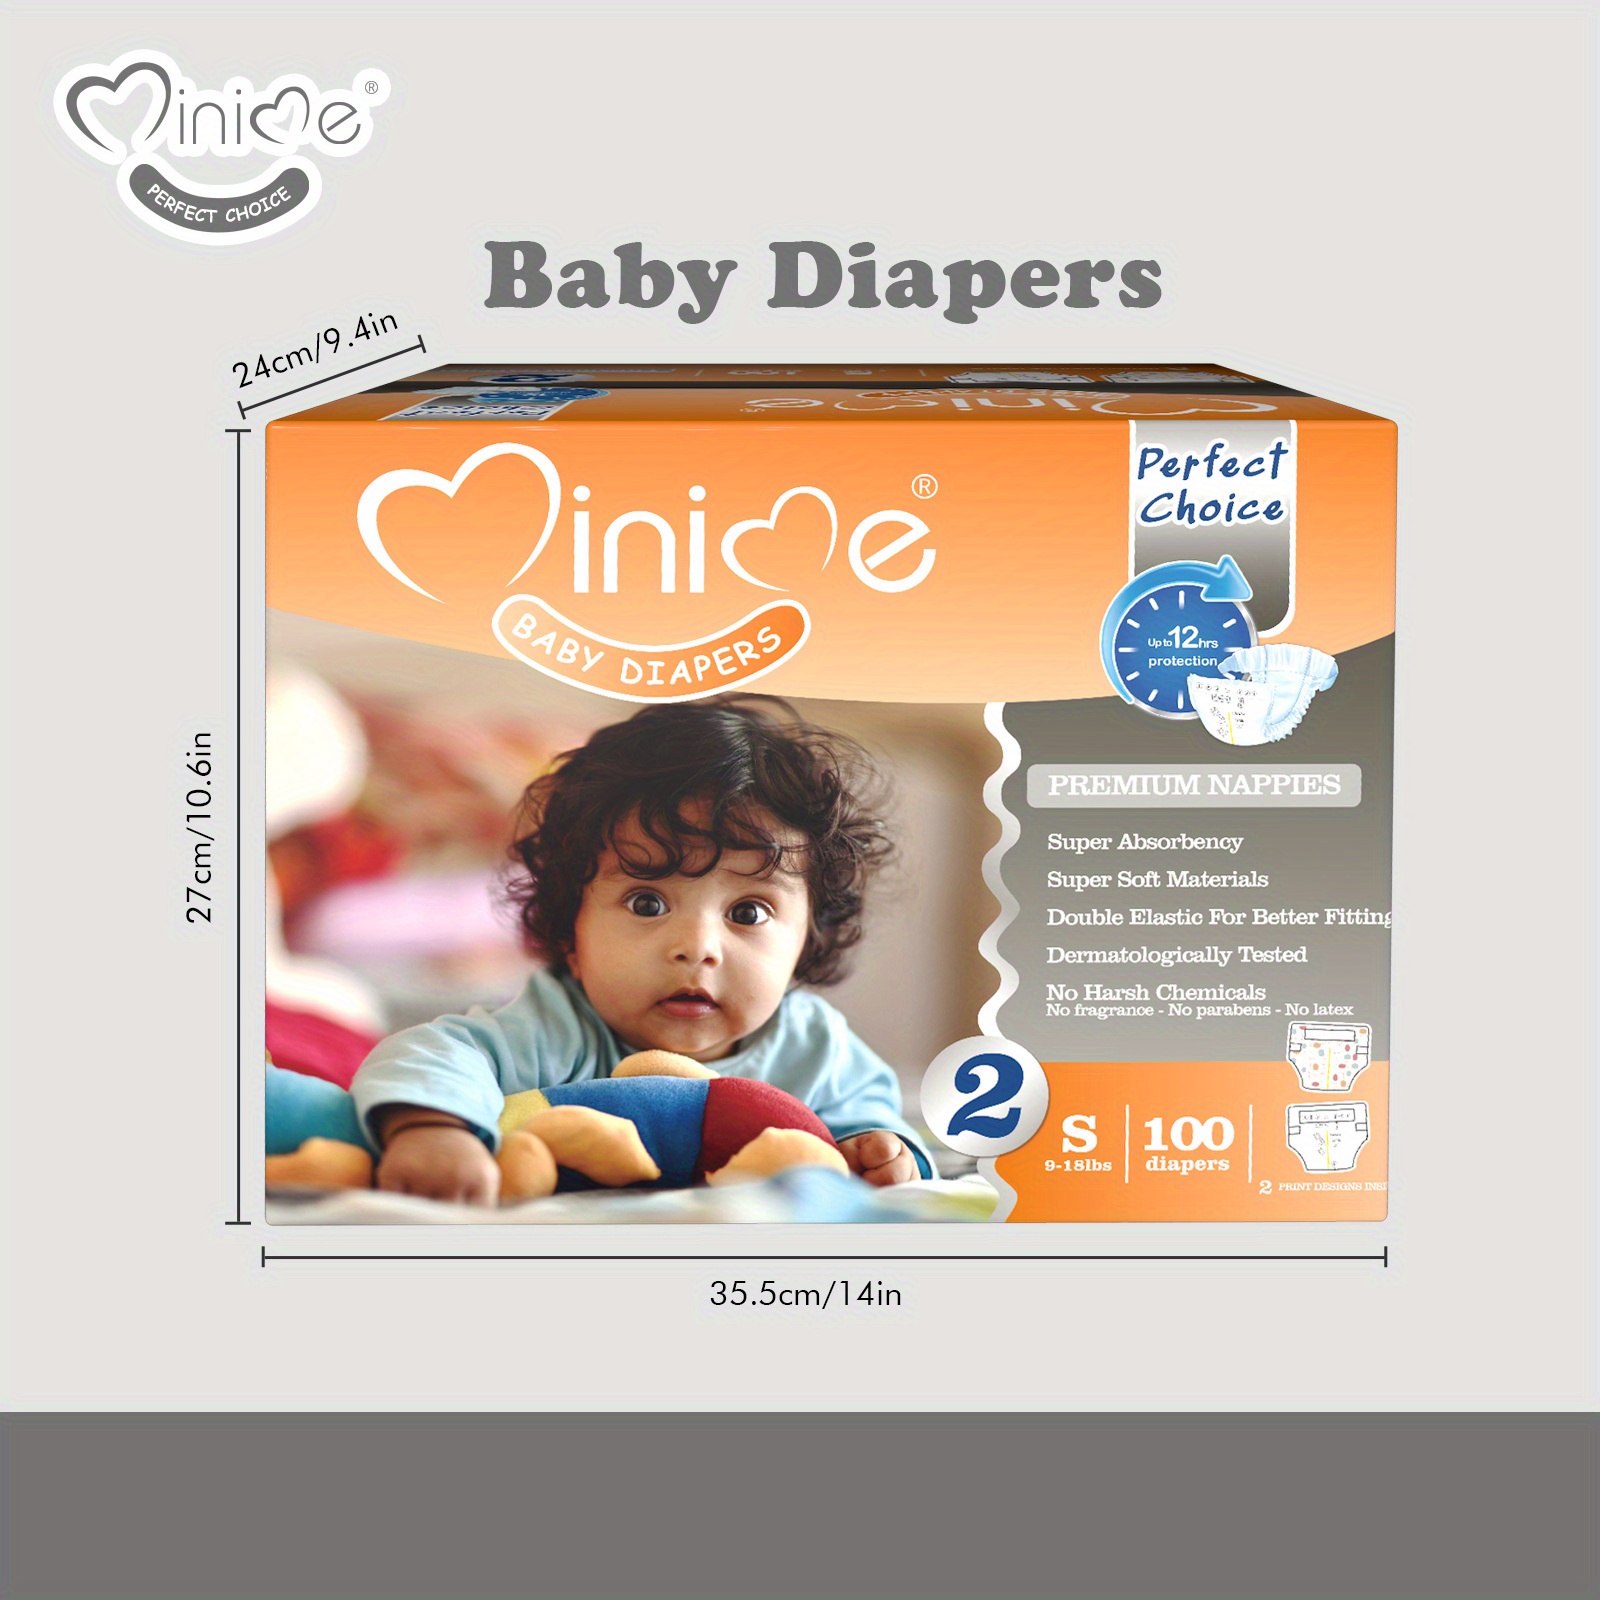 Absorbent Overnight Baby Diaper: Made with unique 3D Core